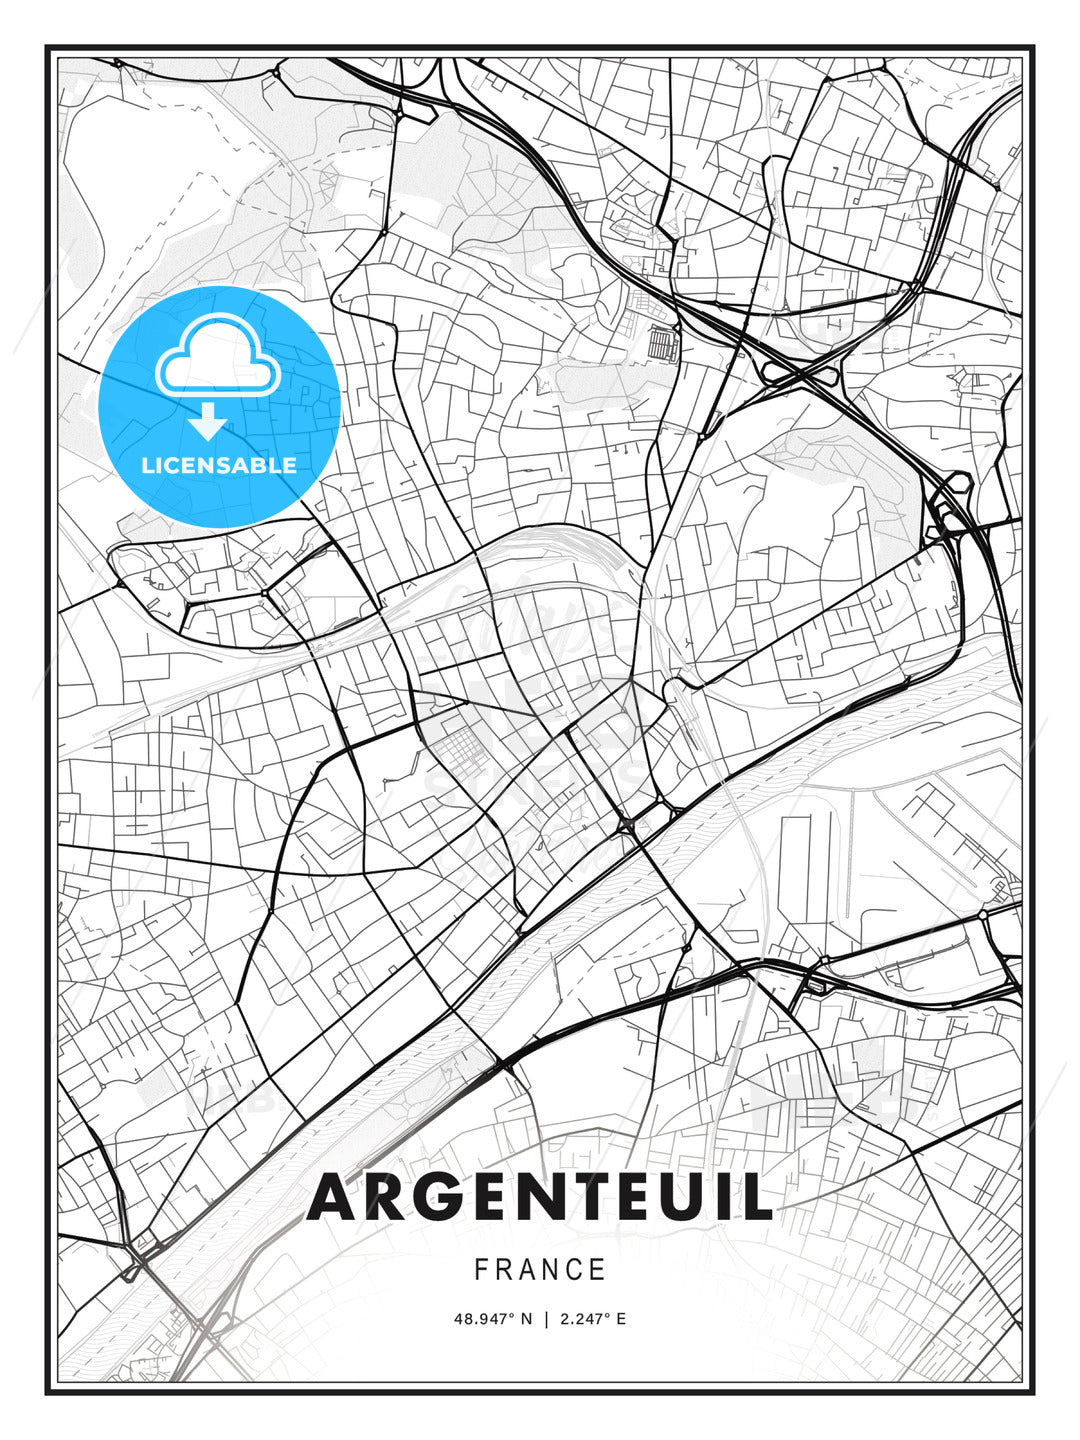 Argenteuil, France, Modern Print Template in Various Formats - HEBSTREITS Sketches